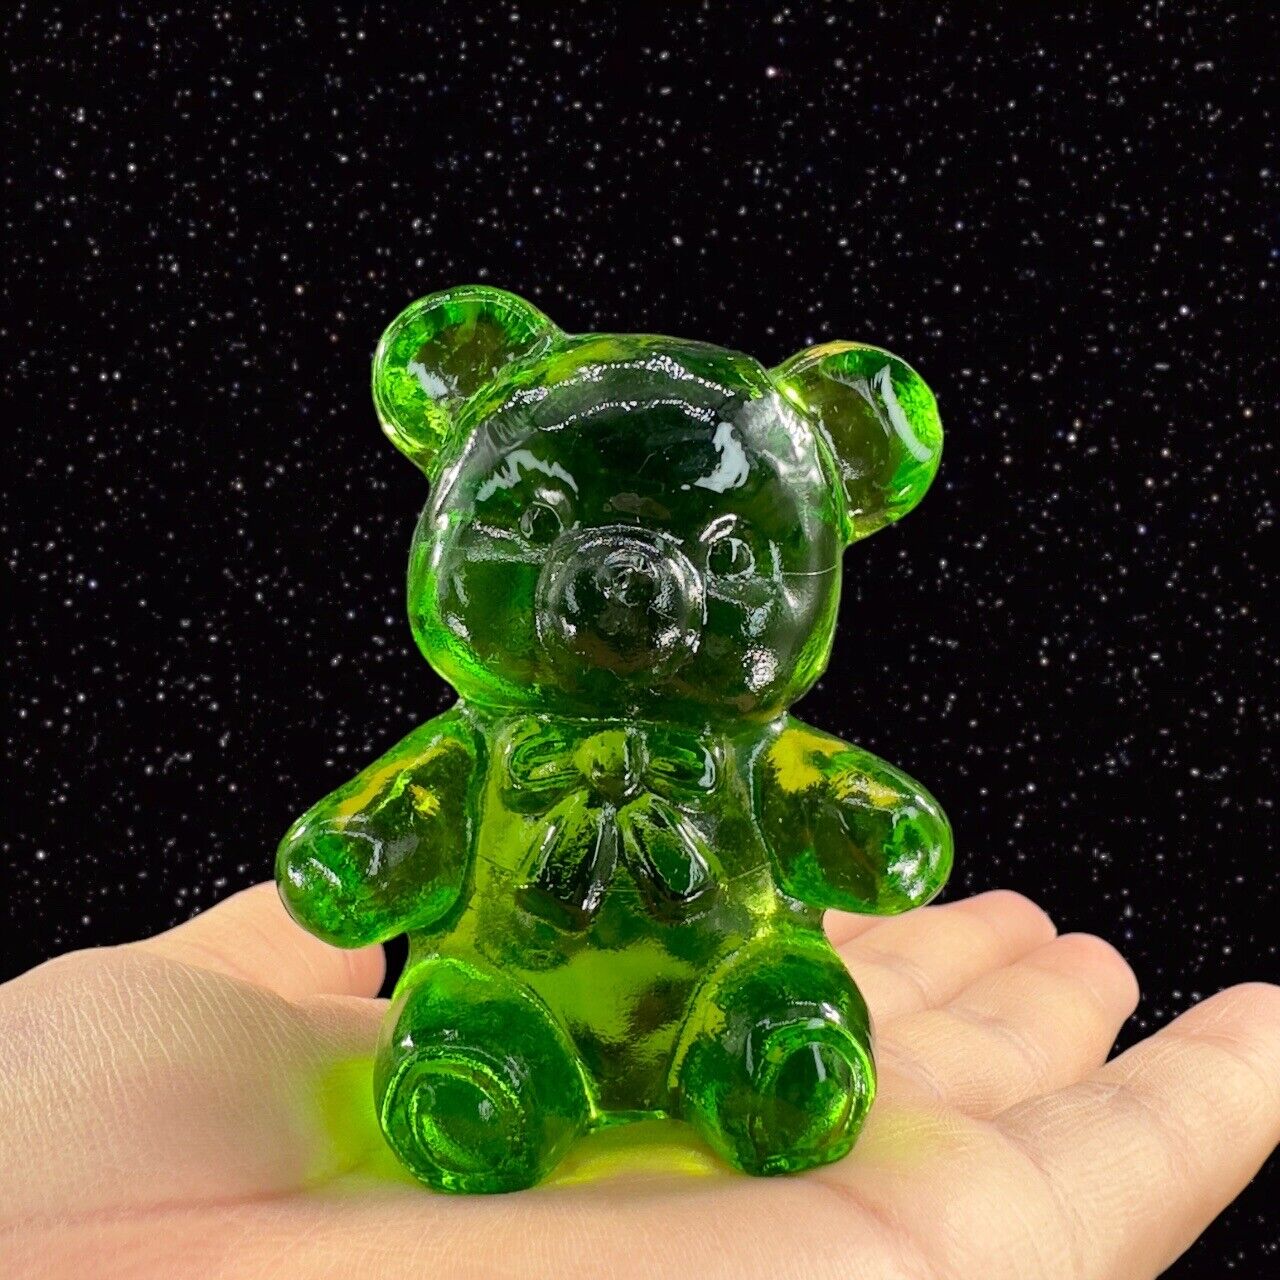 BOYD GLASS FUZZY THE BEAR Emerald Green Glass Small Figurine Paperweight Marked